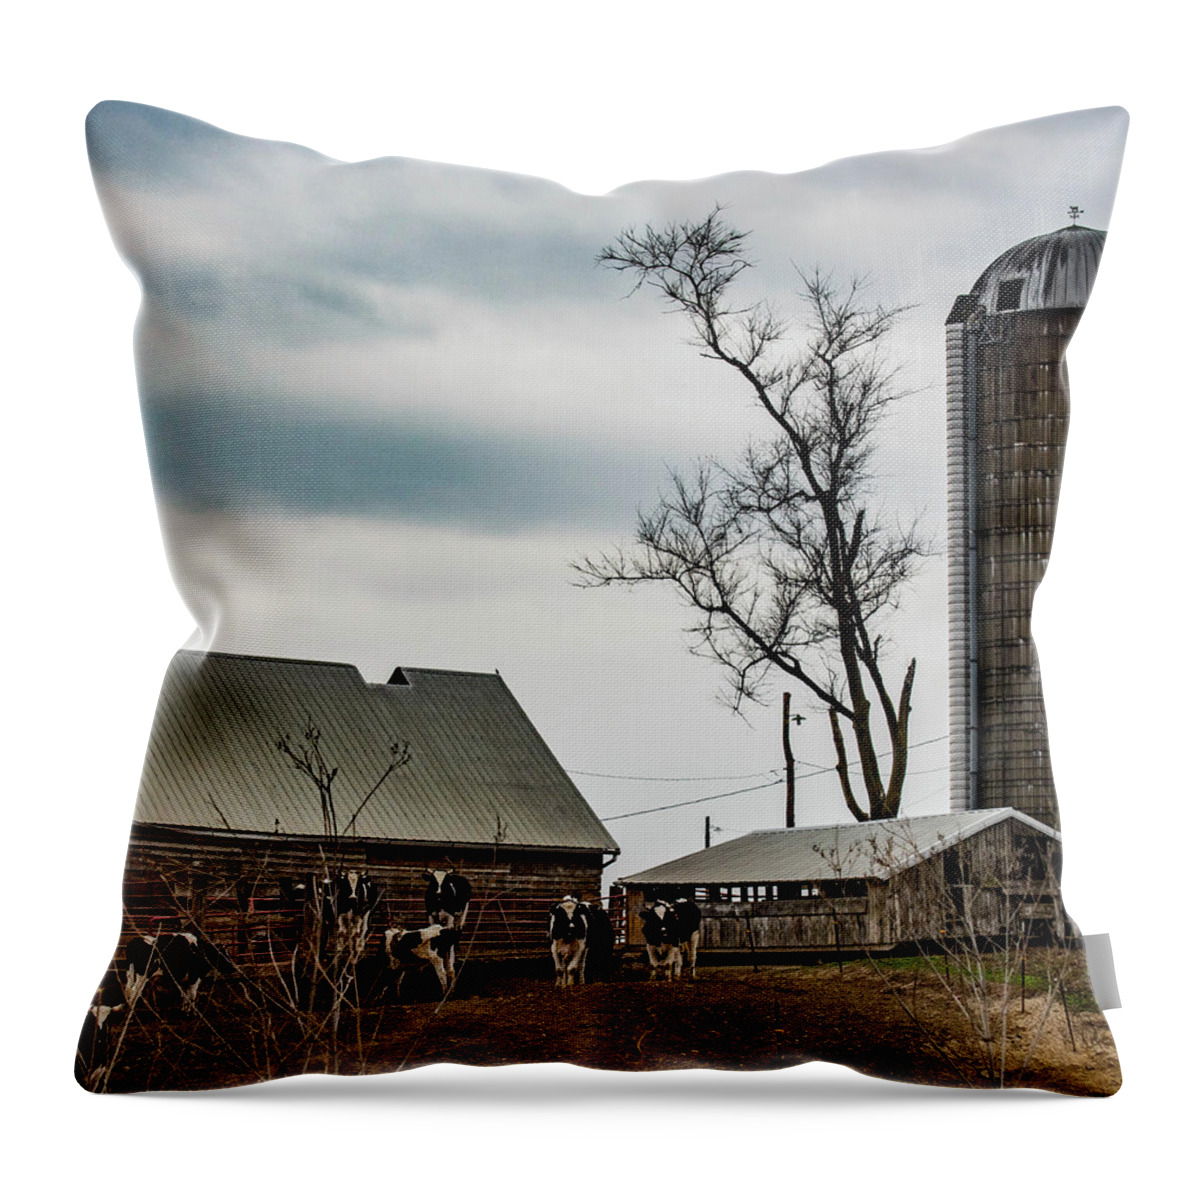  Throw Pillow featuring the photograph On the Farm by Wendy Carrington